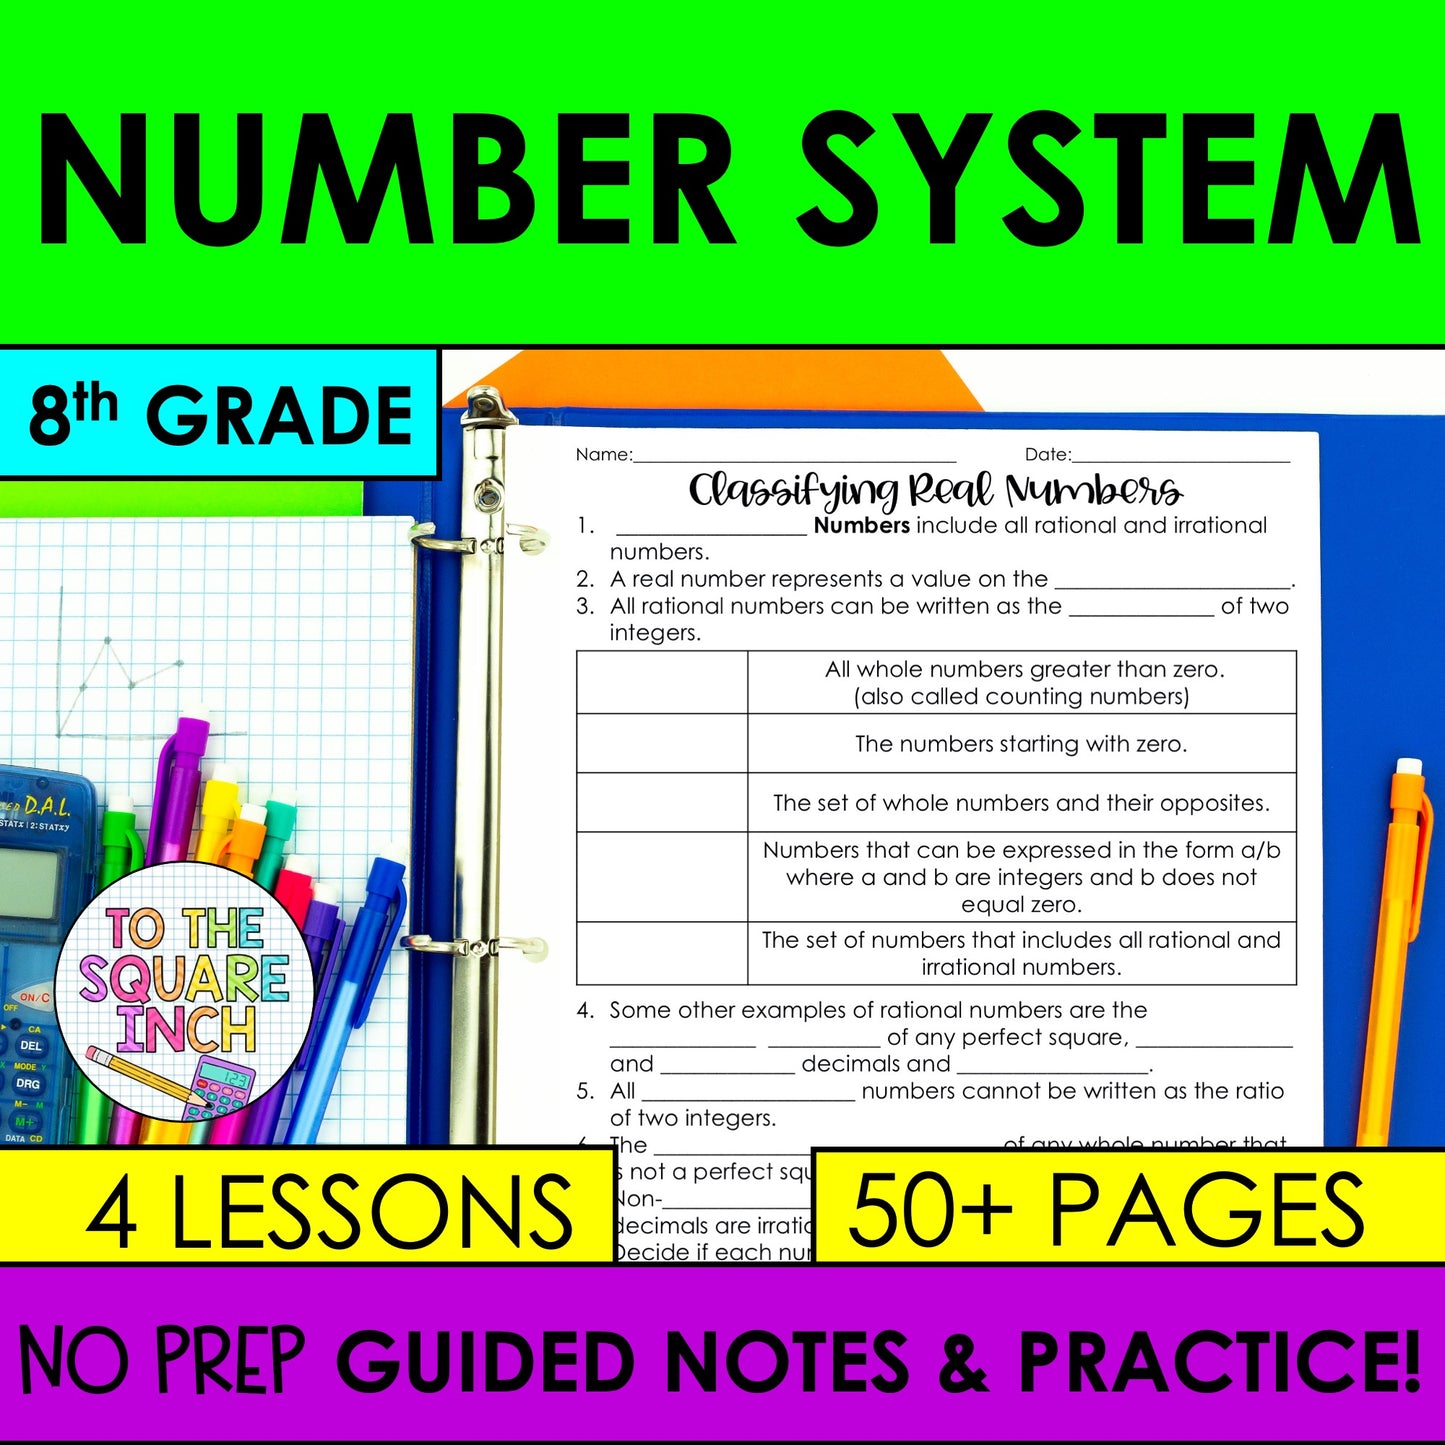 Number System - 8th Grade Math Guided Notes